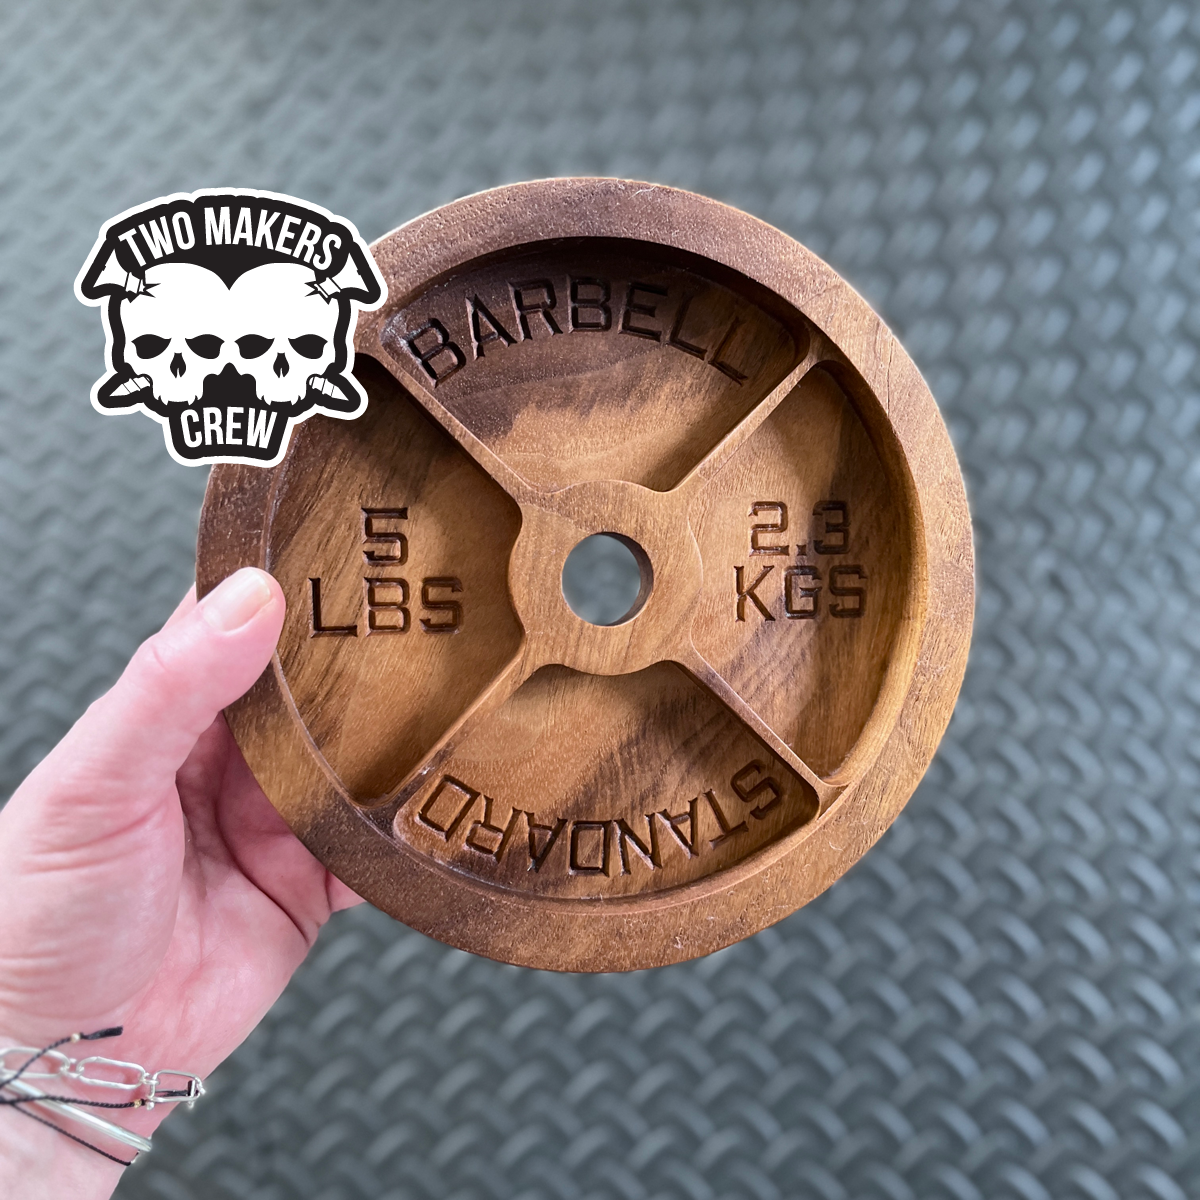 5 lbs walnut barbell weight plate tray makes the perfect coach appreciation gifts